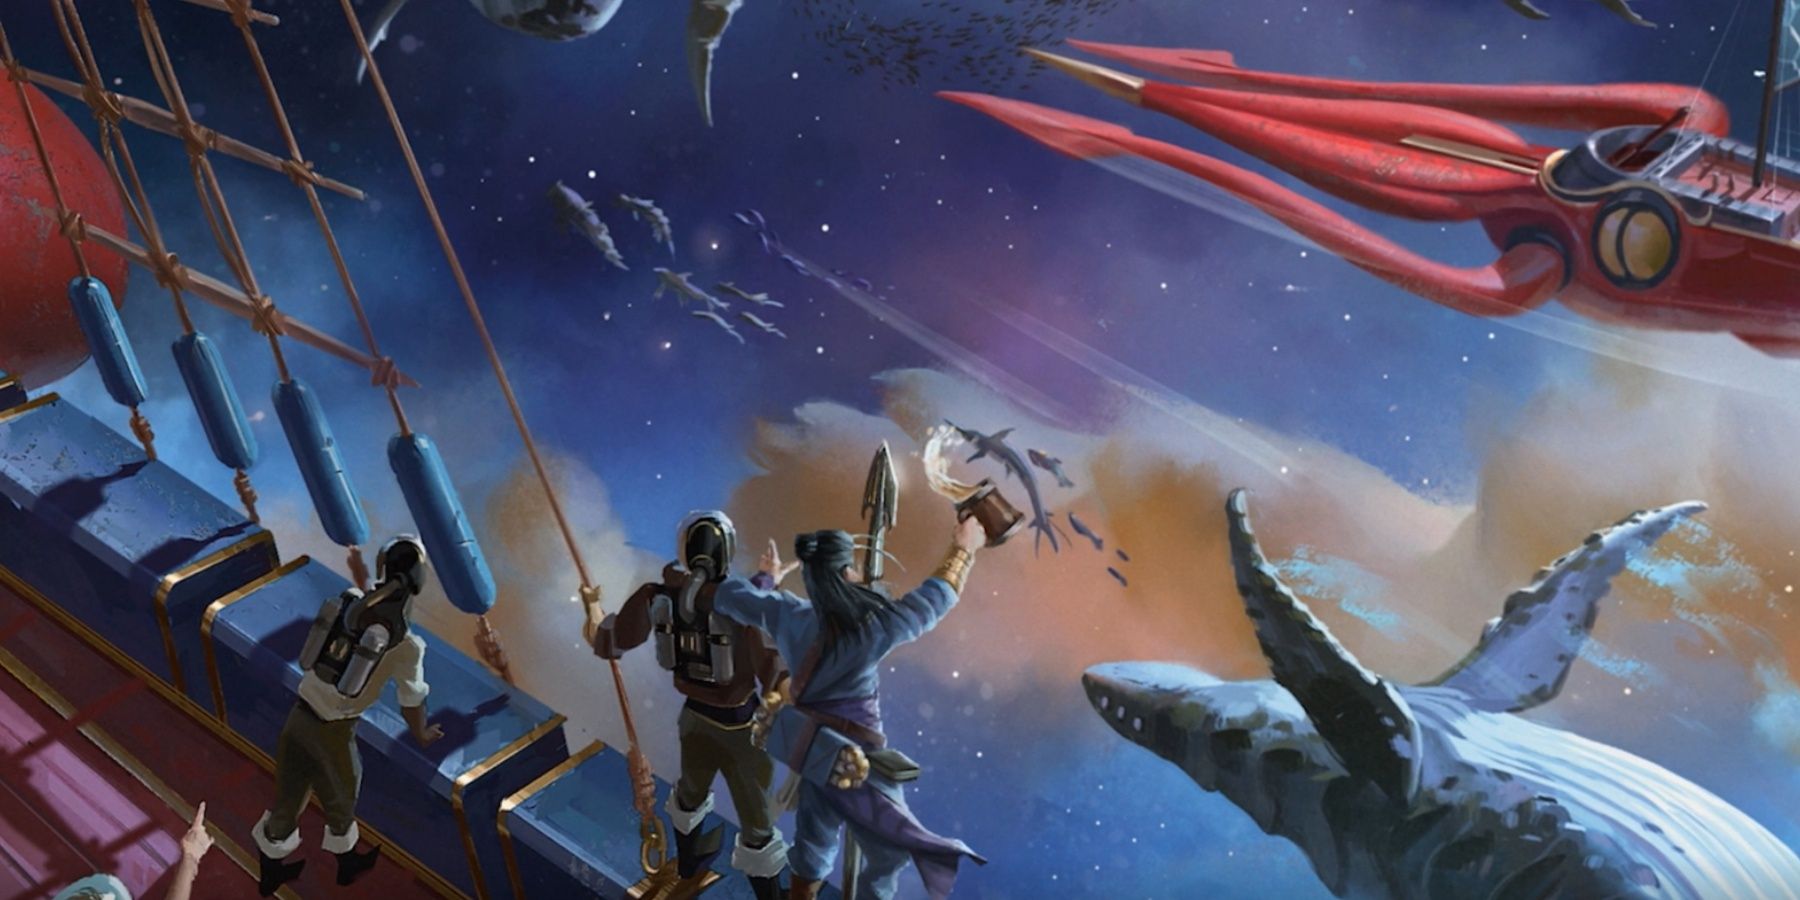 spelljammer characters looking over the side of a ship